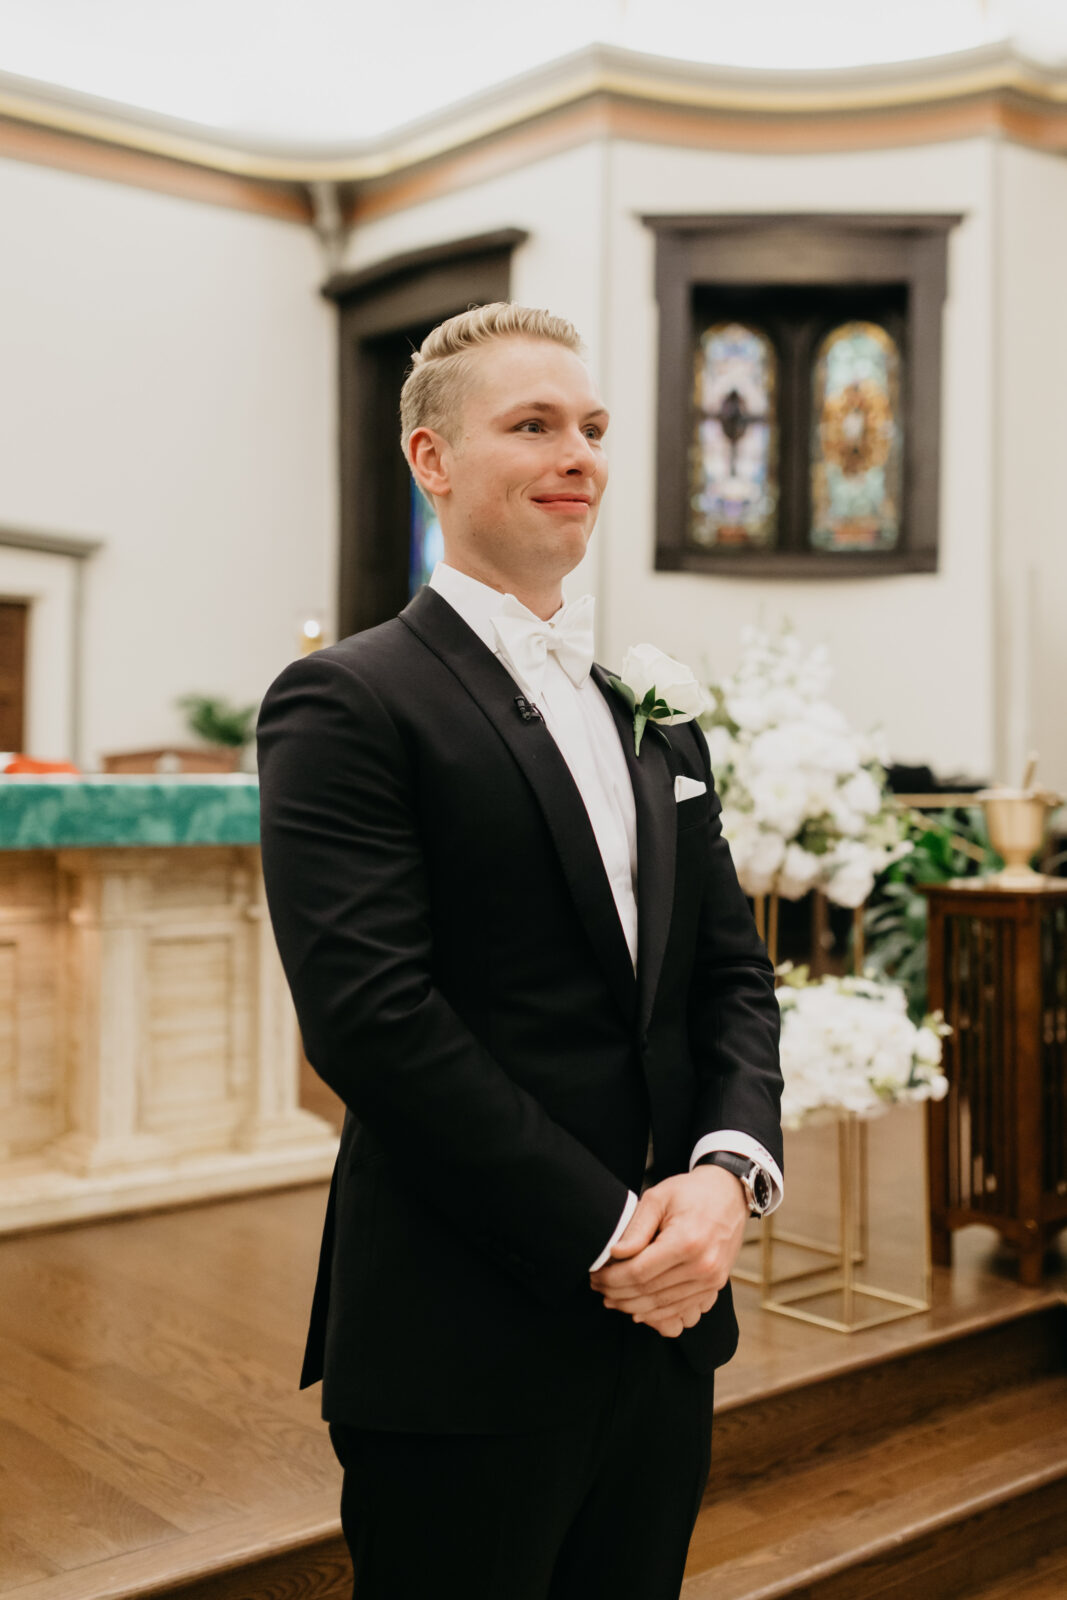 A photo of the groom waiting for the bride on the altar